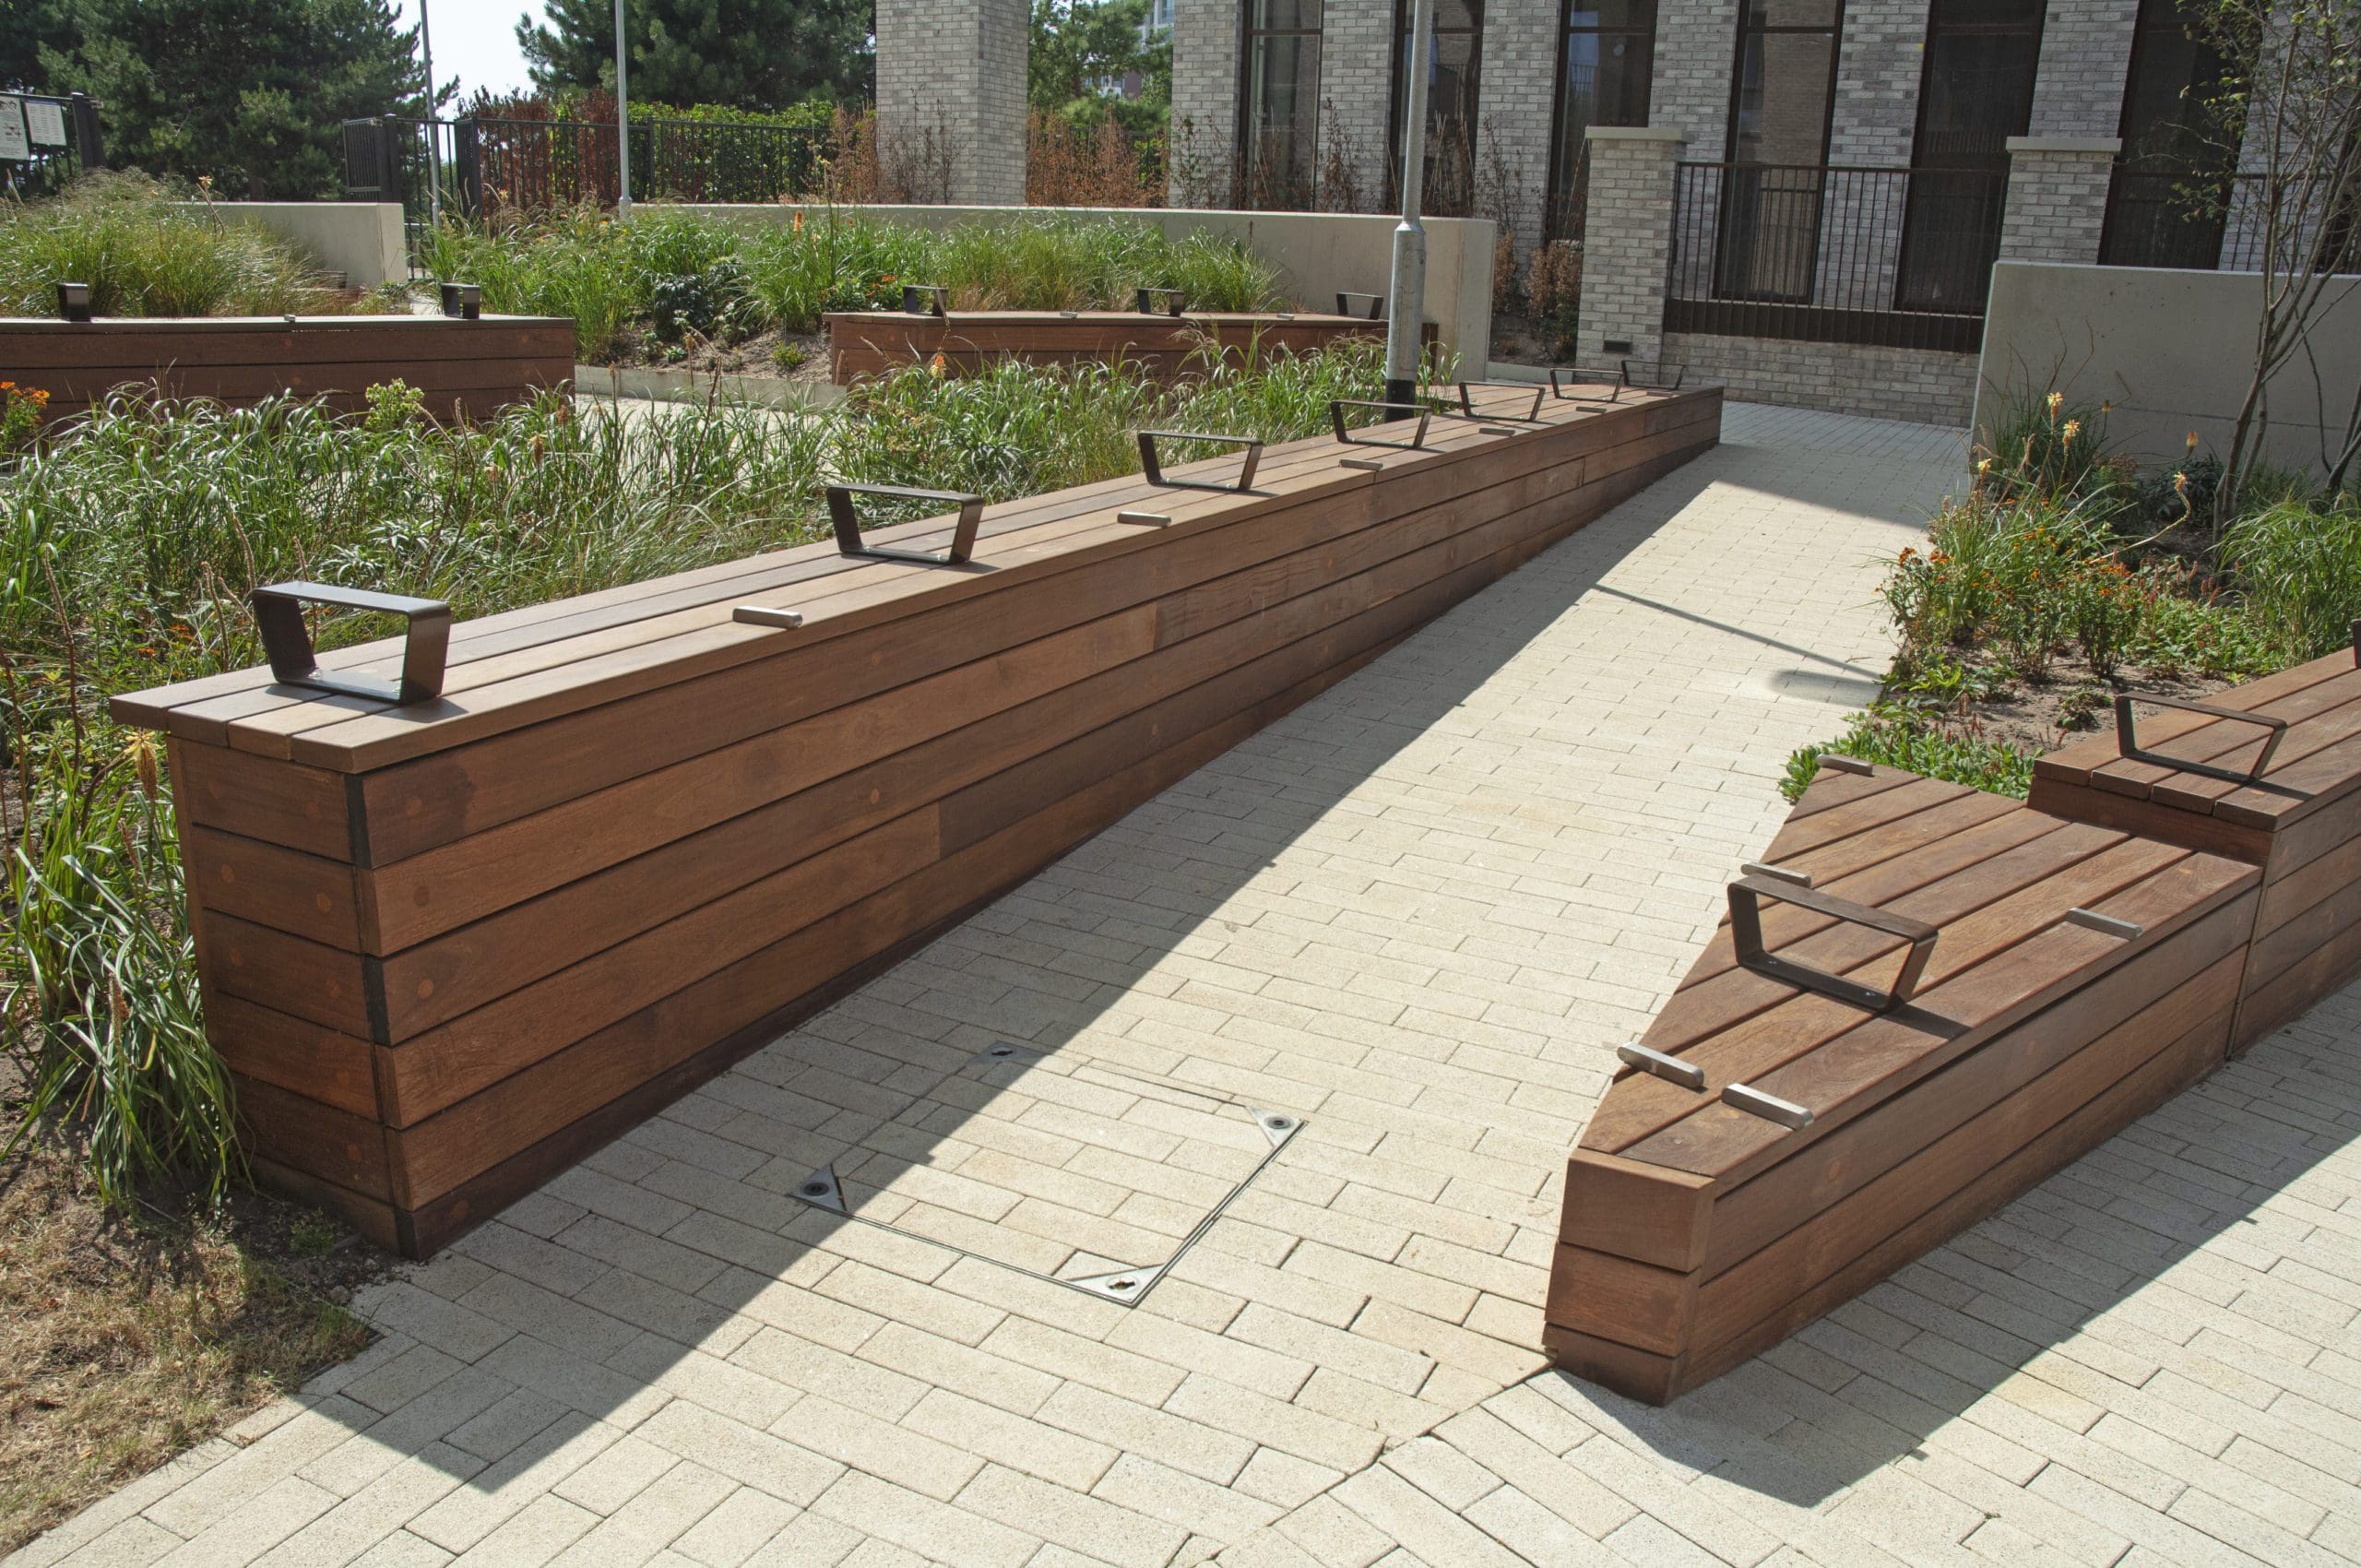 Angled zig zag wooden timber decking creating long bench seating areas and forming up hill pathway